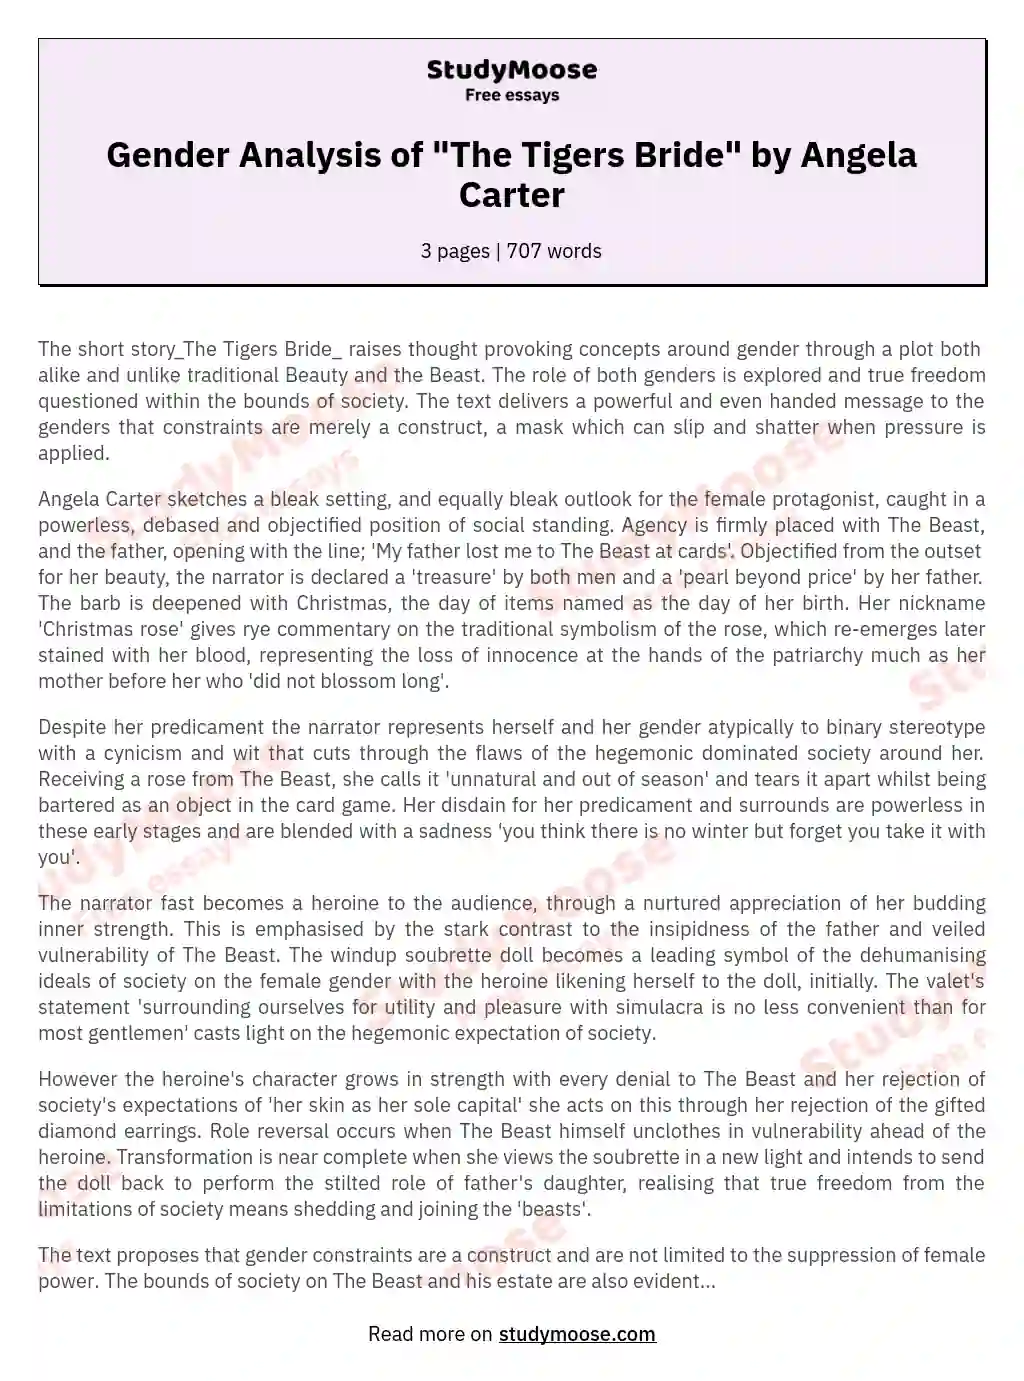 Gender Analysis of "The Tigers Bride" by Angela Carter essay